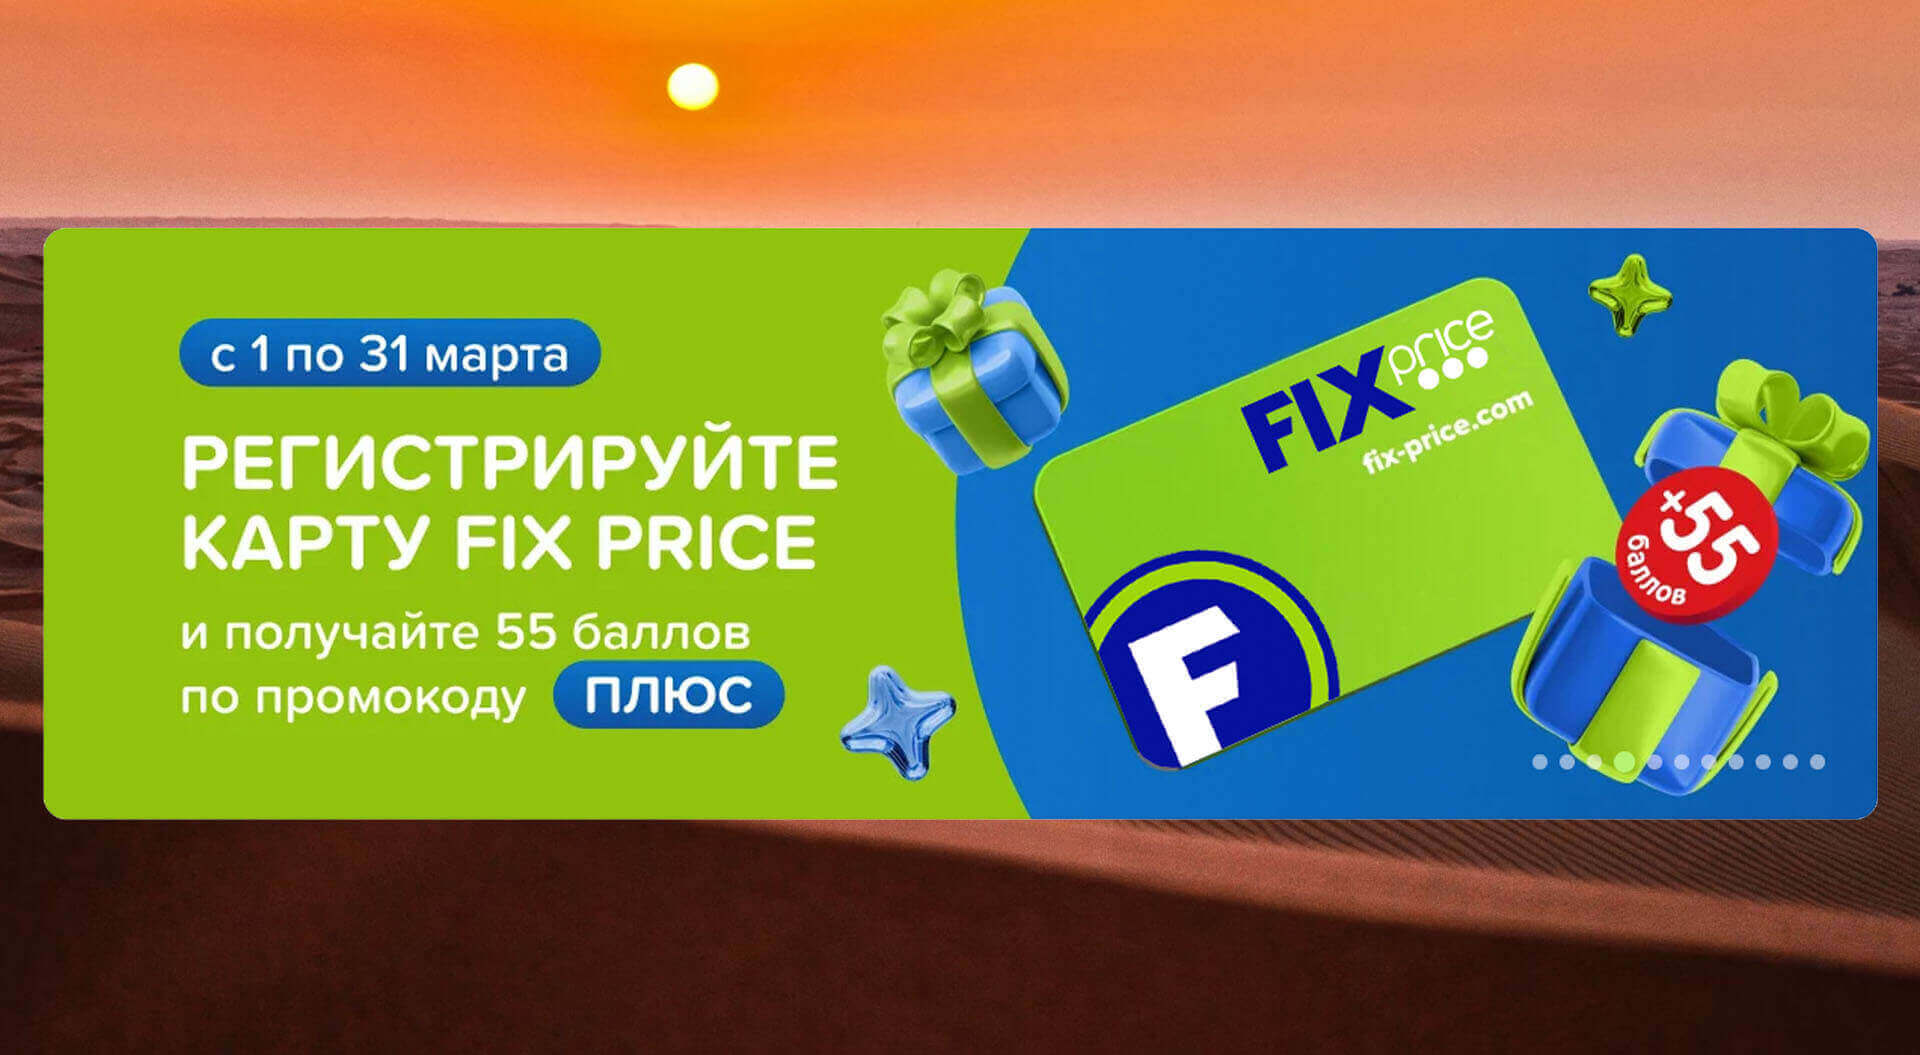 Fix Price Russia, Store Card Advertising, Retail Branding, Brand Identity, Store Interior Design, Graphic Communications - CampbellRigg Agency